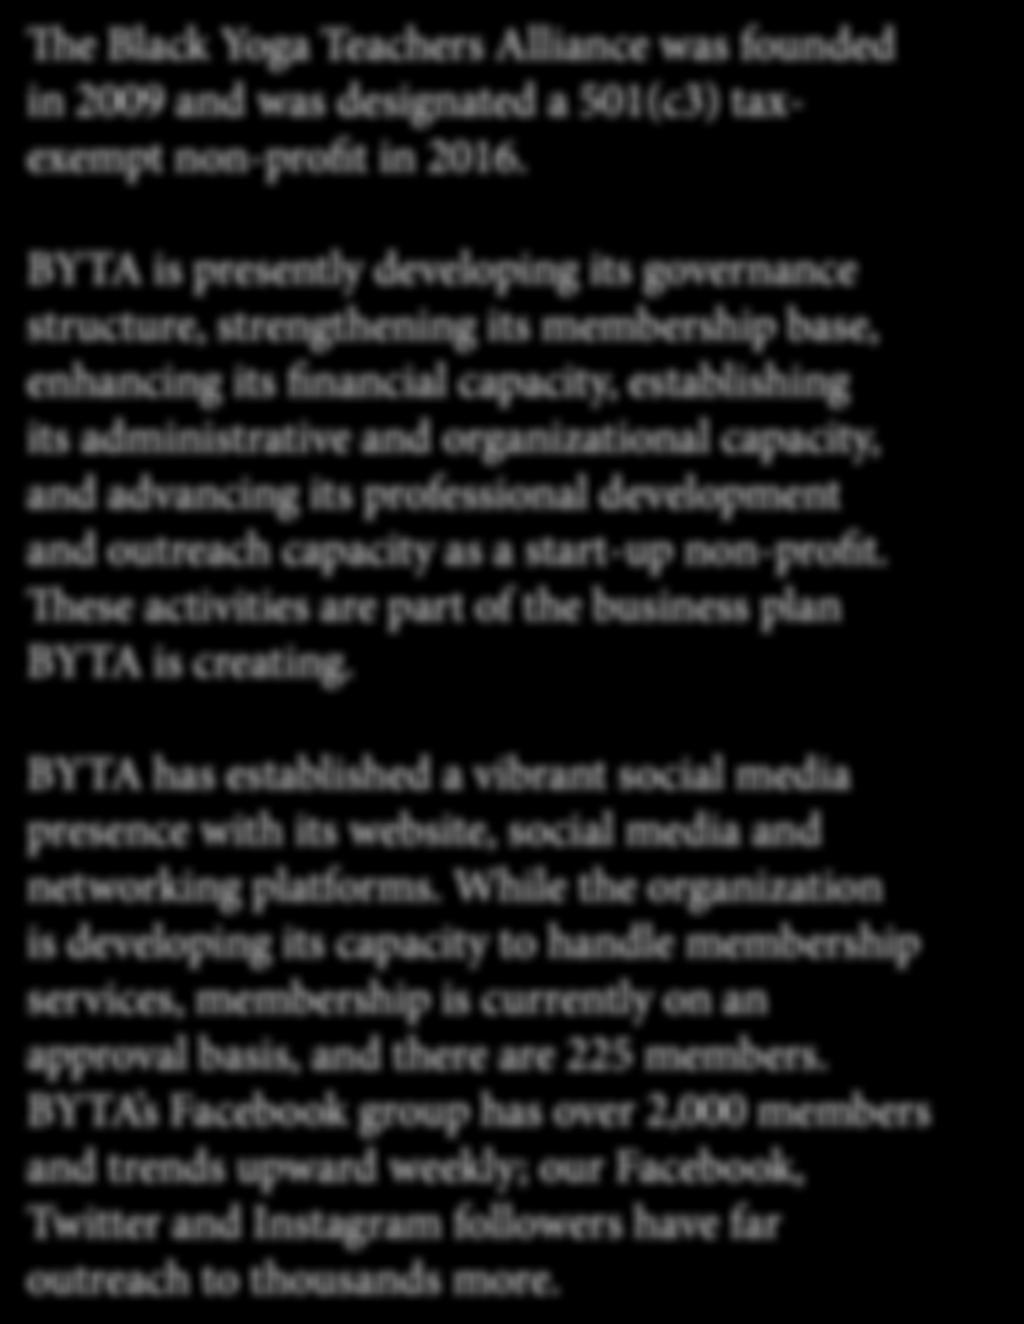 its professional development and outreach capacity as a start-up non-profit. These activities are part of the business plan BYTA is creating.